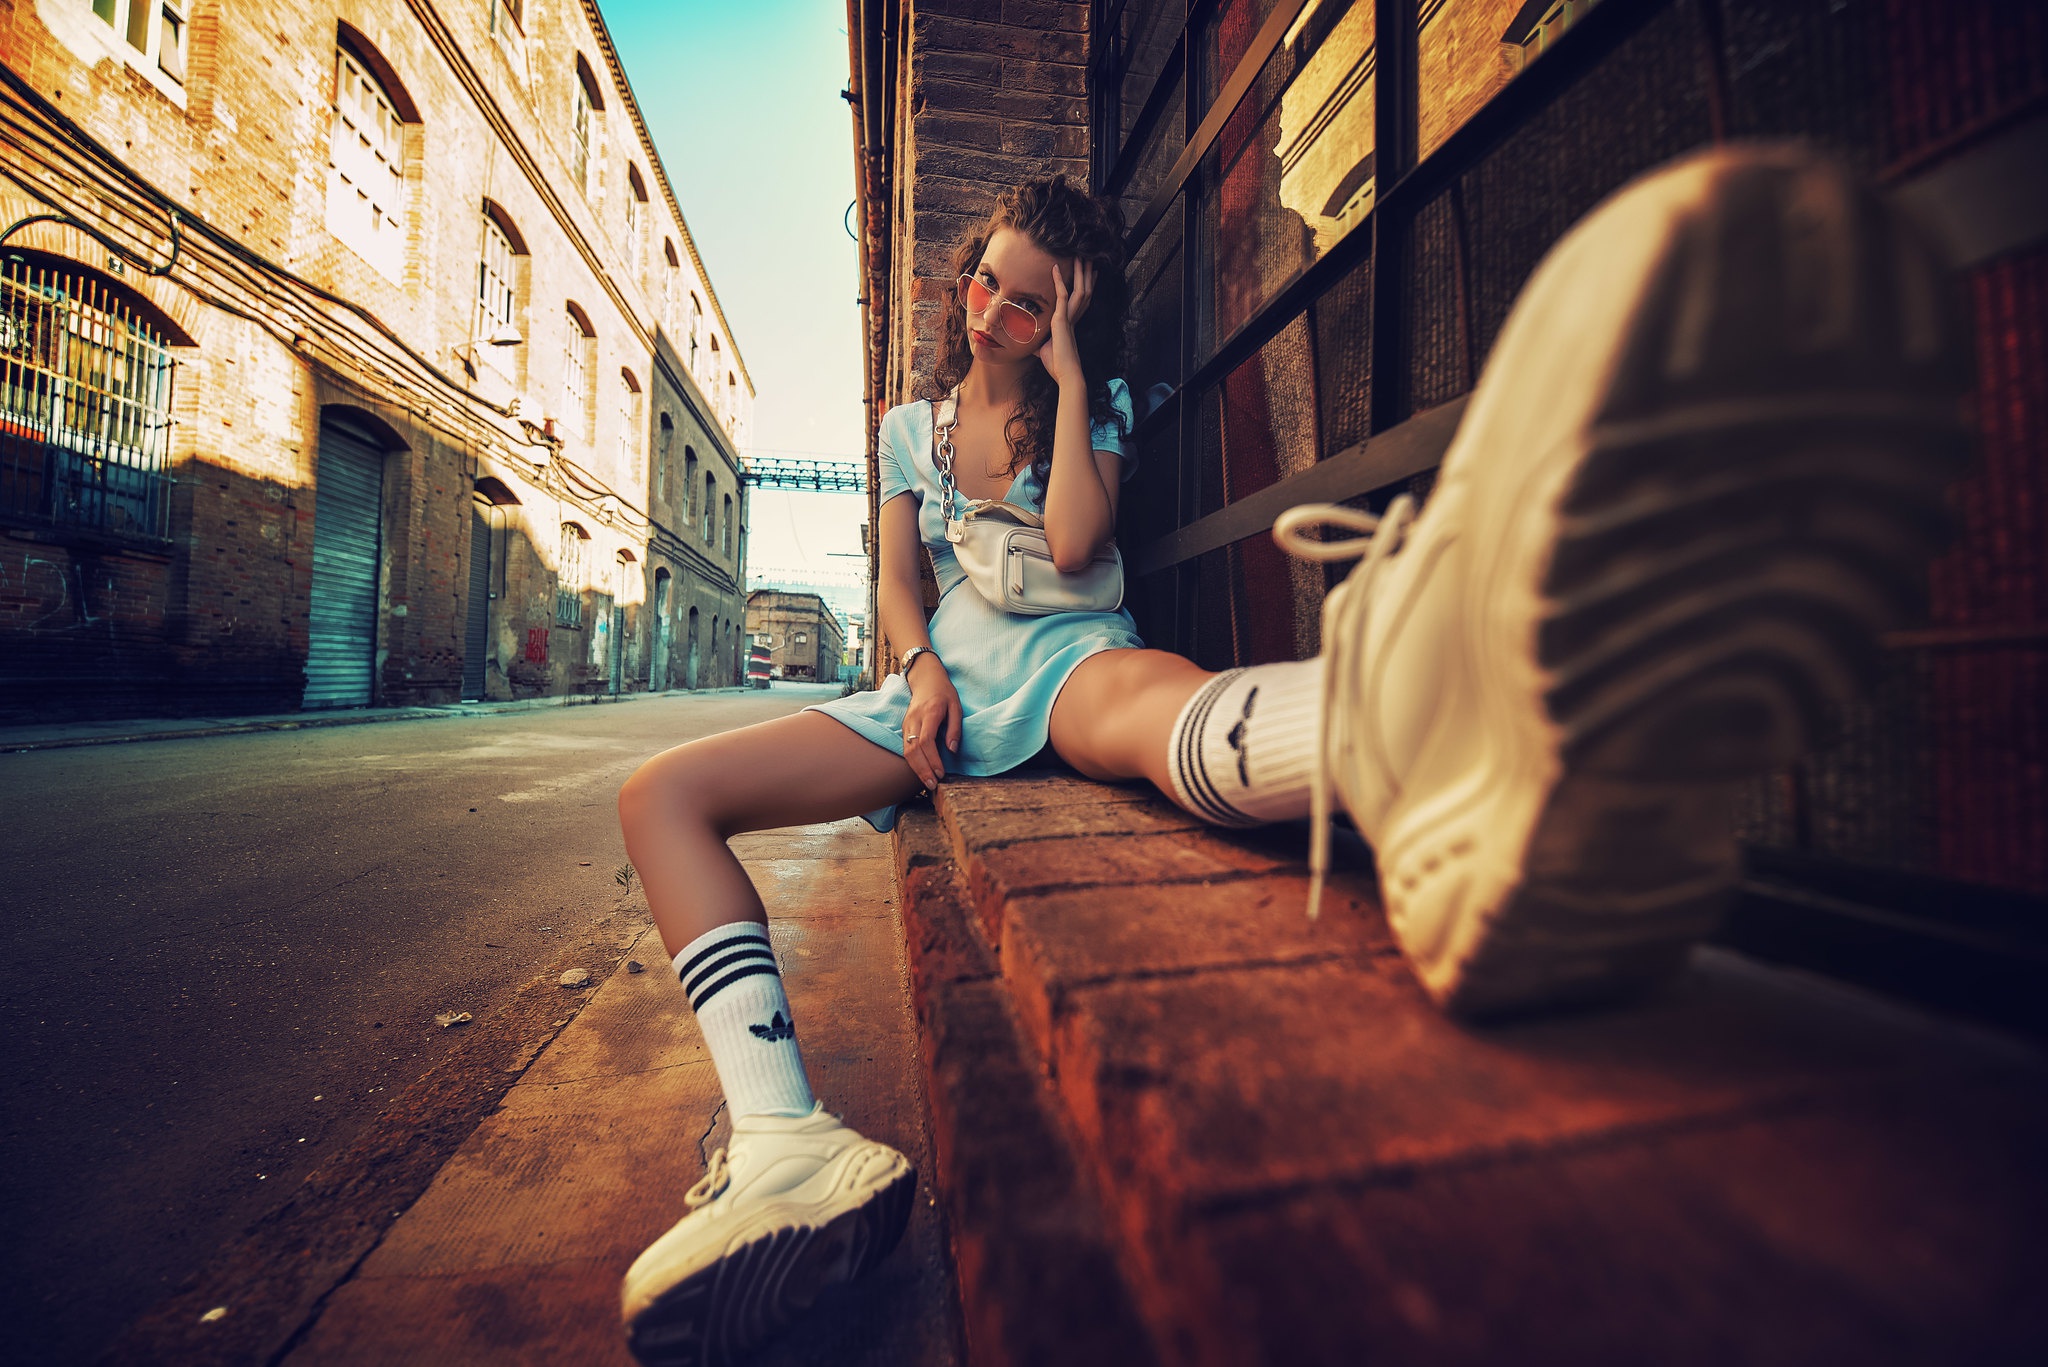 People 2048x1367 Alex Siracusano model women brunette mouth lips lipstick shirt shorts legs socks sneakers urban street building city sunglasses women with shades touching face looking at viewer portrait white socks striped socks crew socks blue dress spread legs white shoes pointed toes alleyway